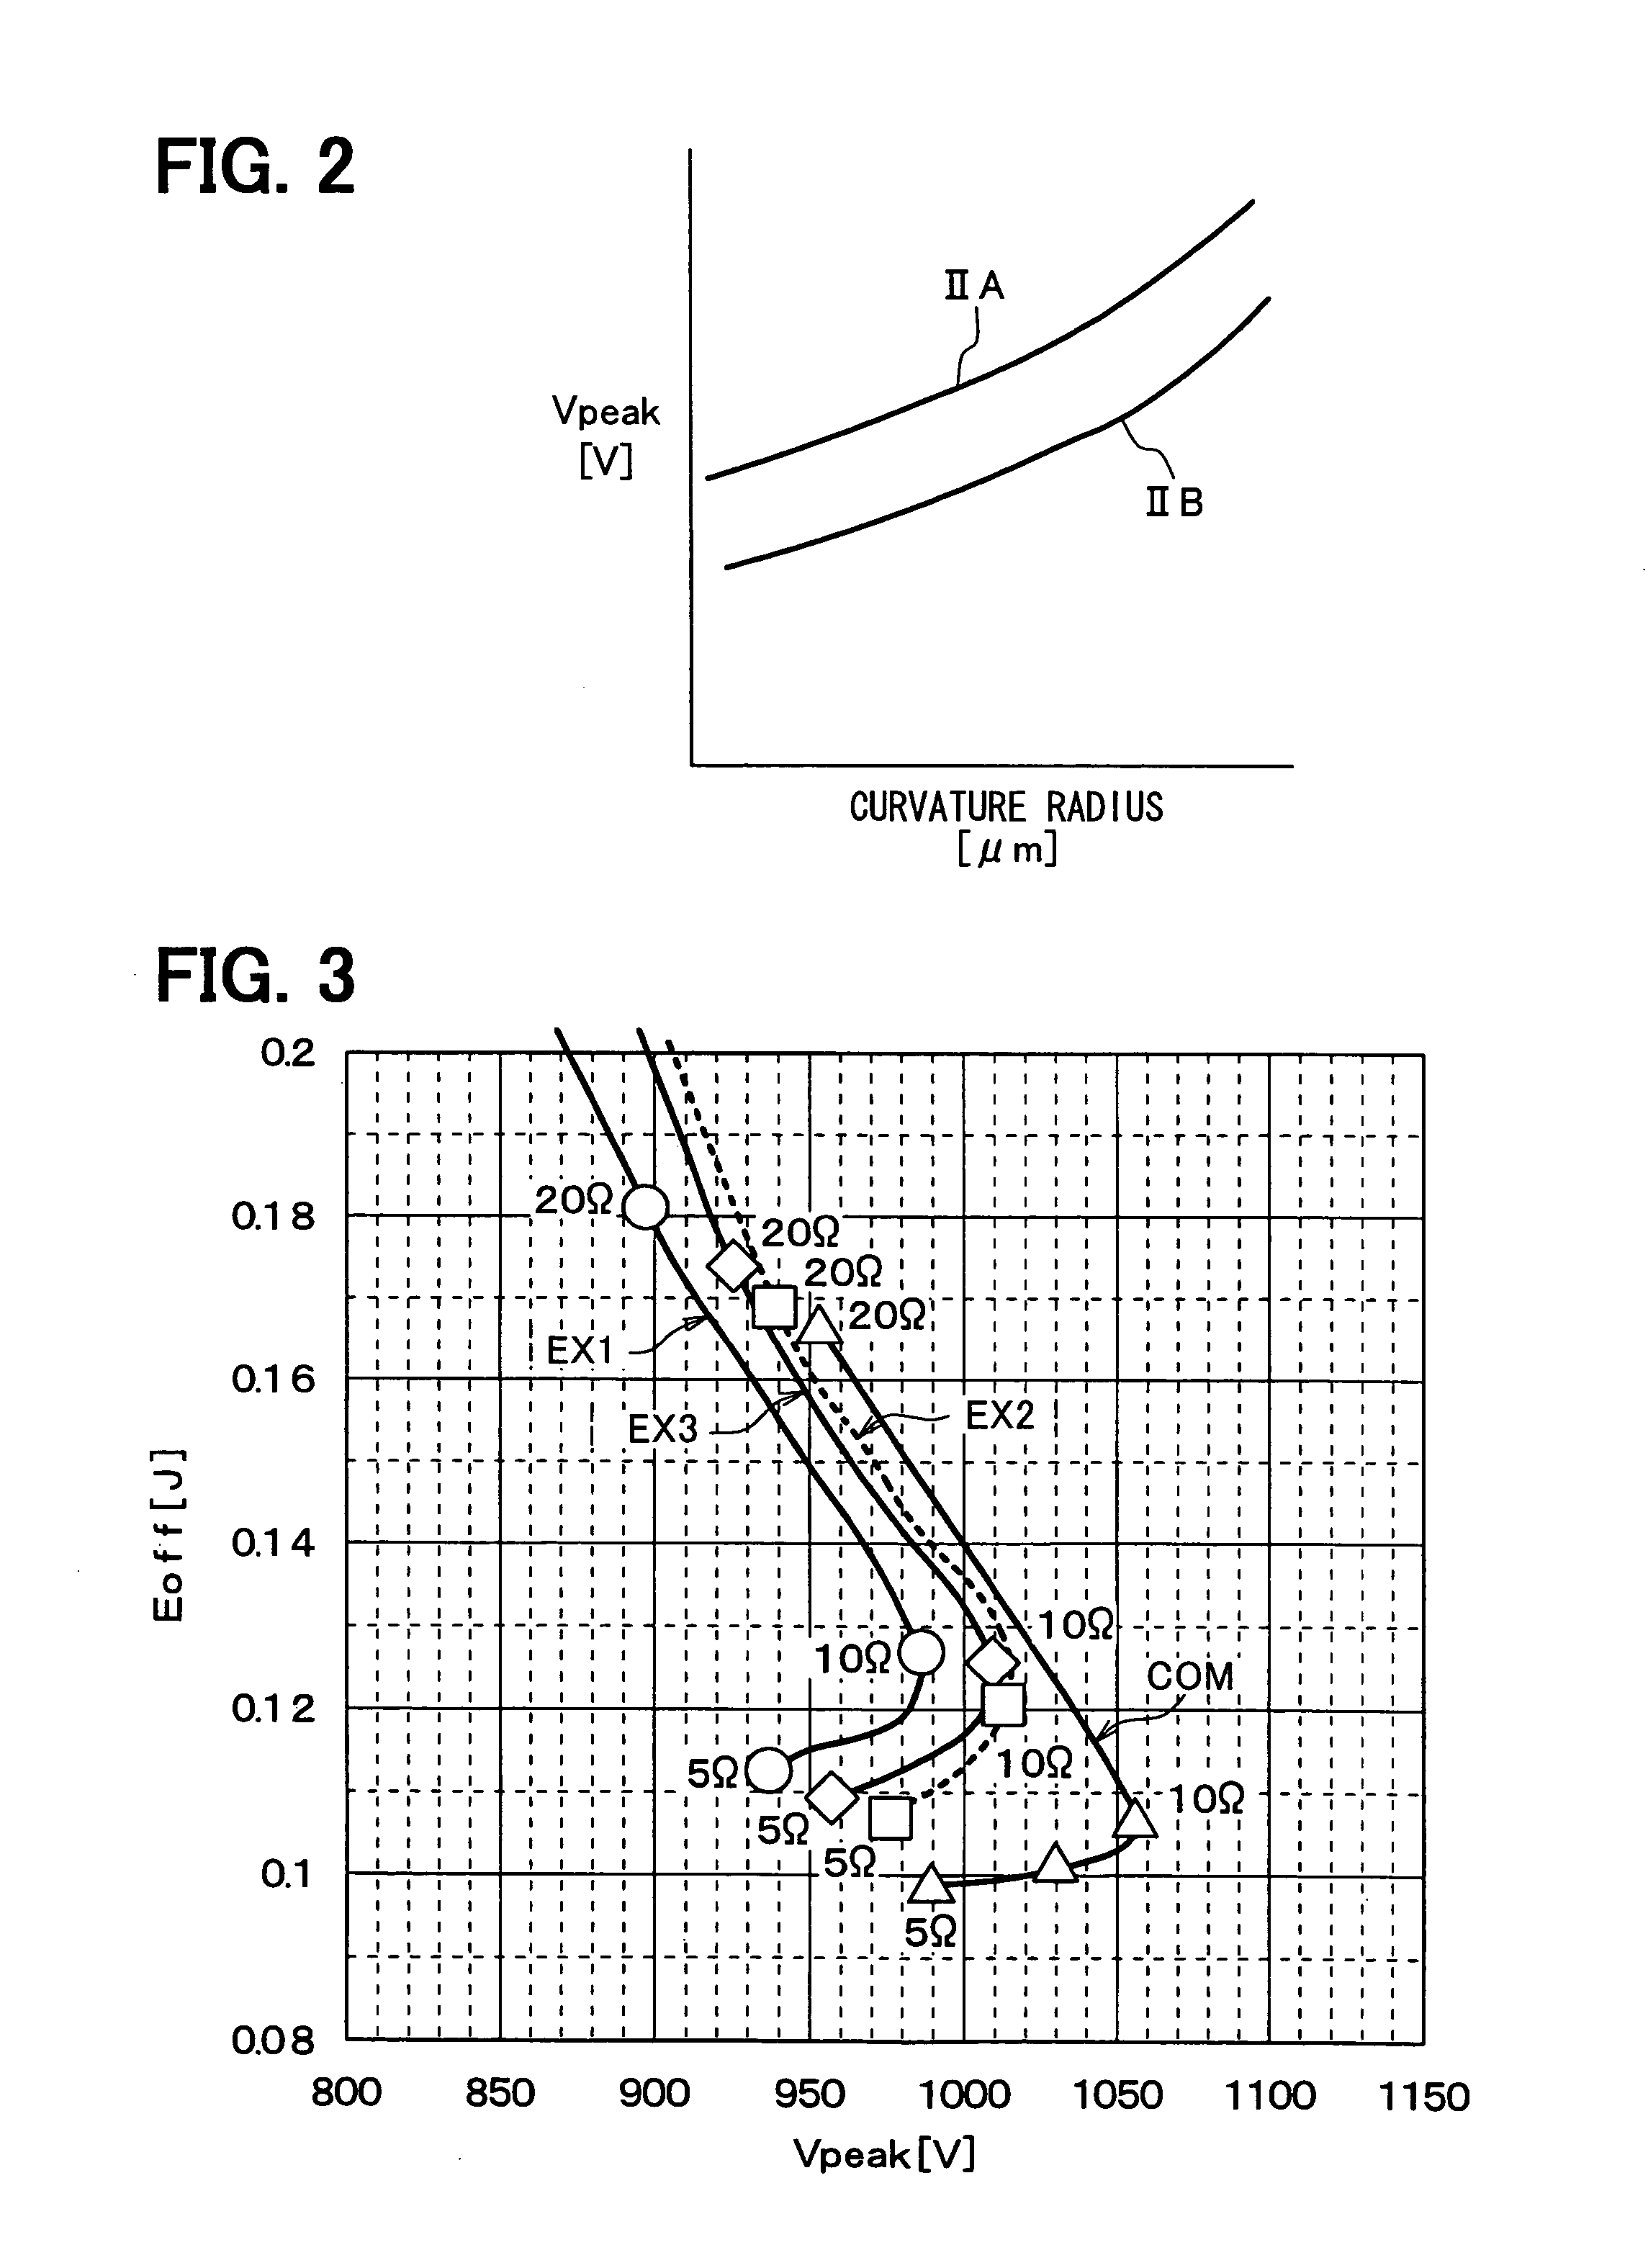 Trench gate type semiconductor device